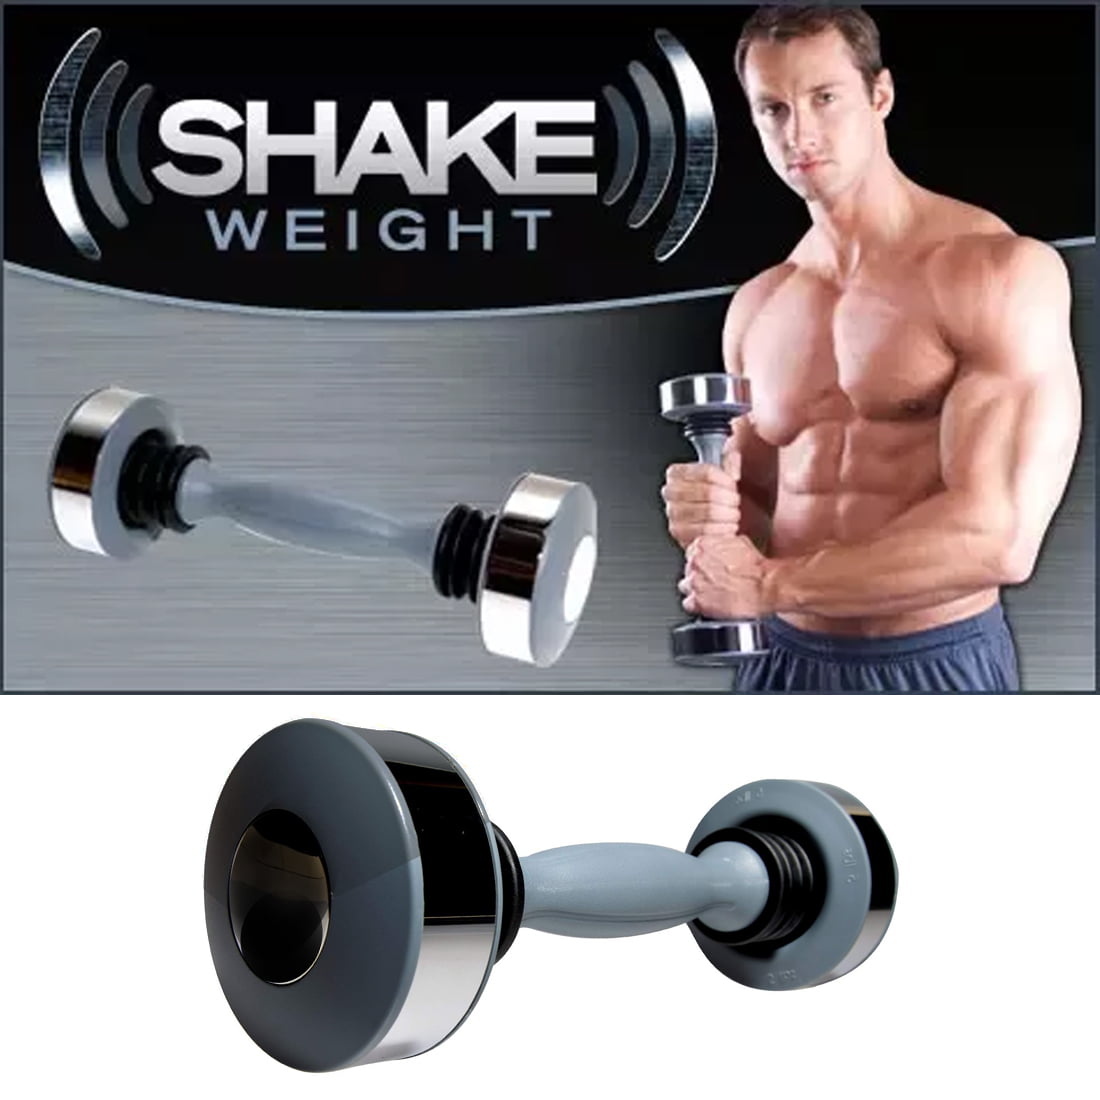  Comfecto Shake Weight for Men Women, 3 lbs Arm